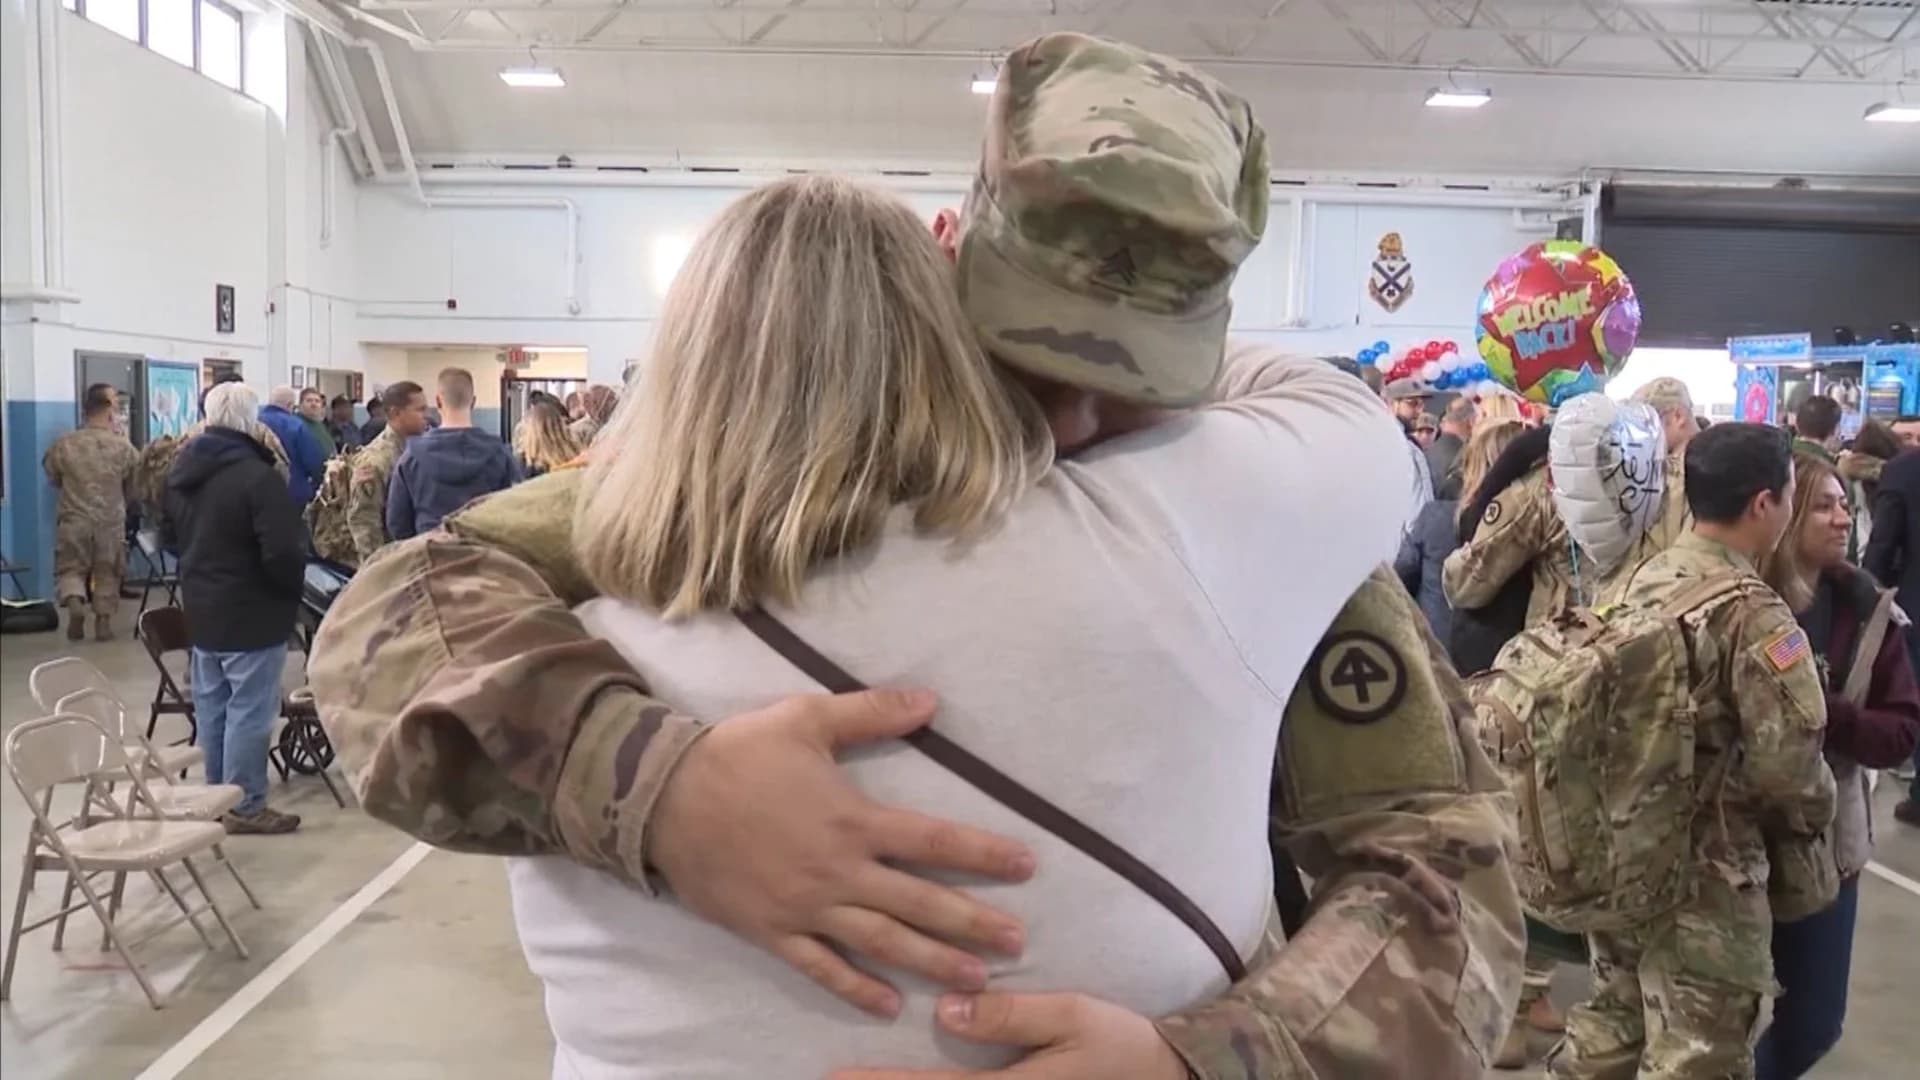 A hero's welcome: Troops greeted by family members as they come home for holidays